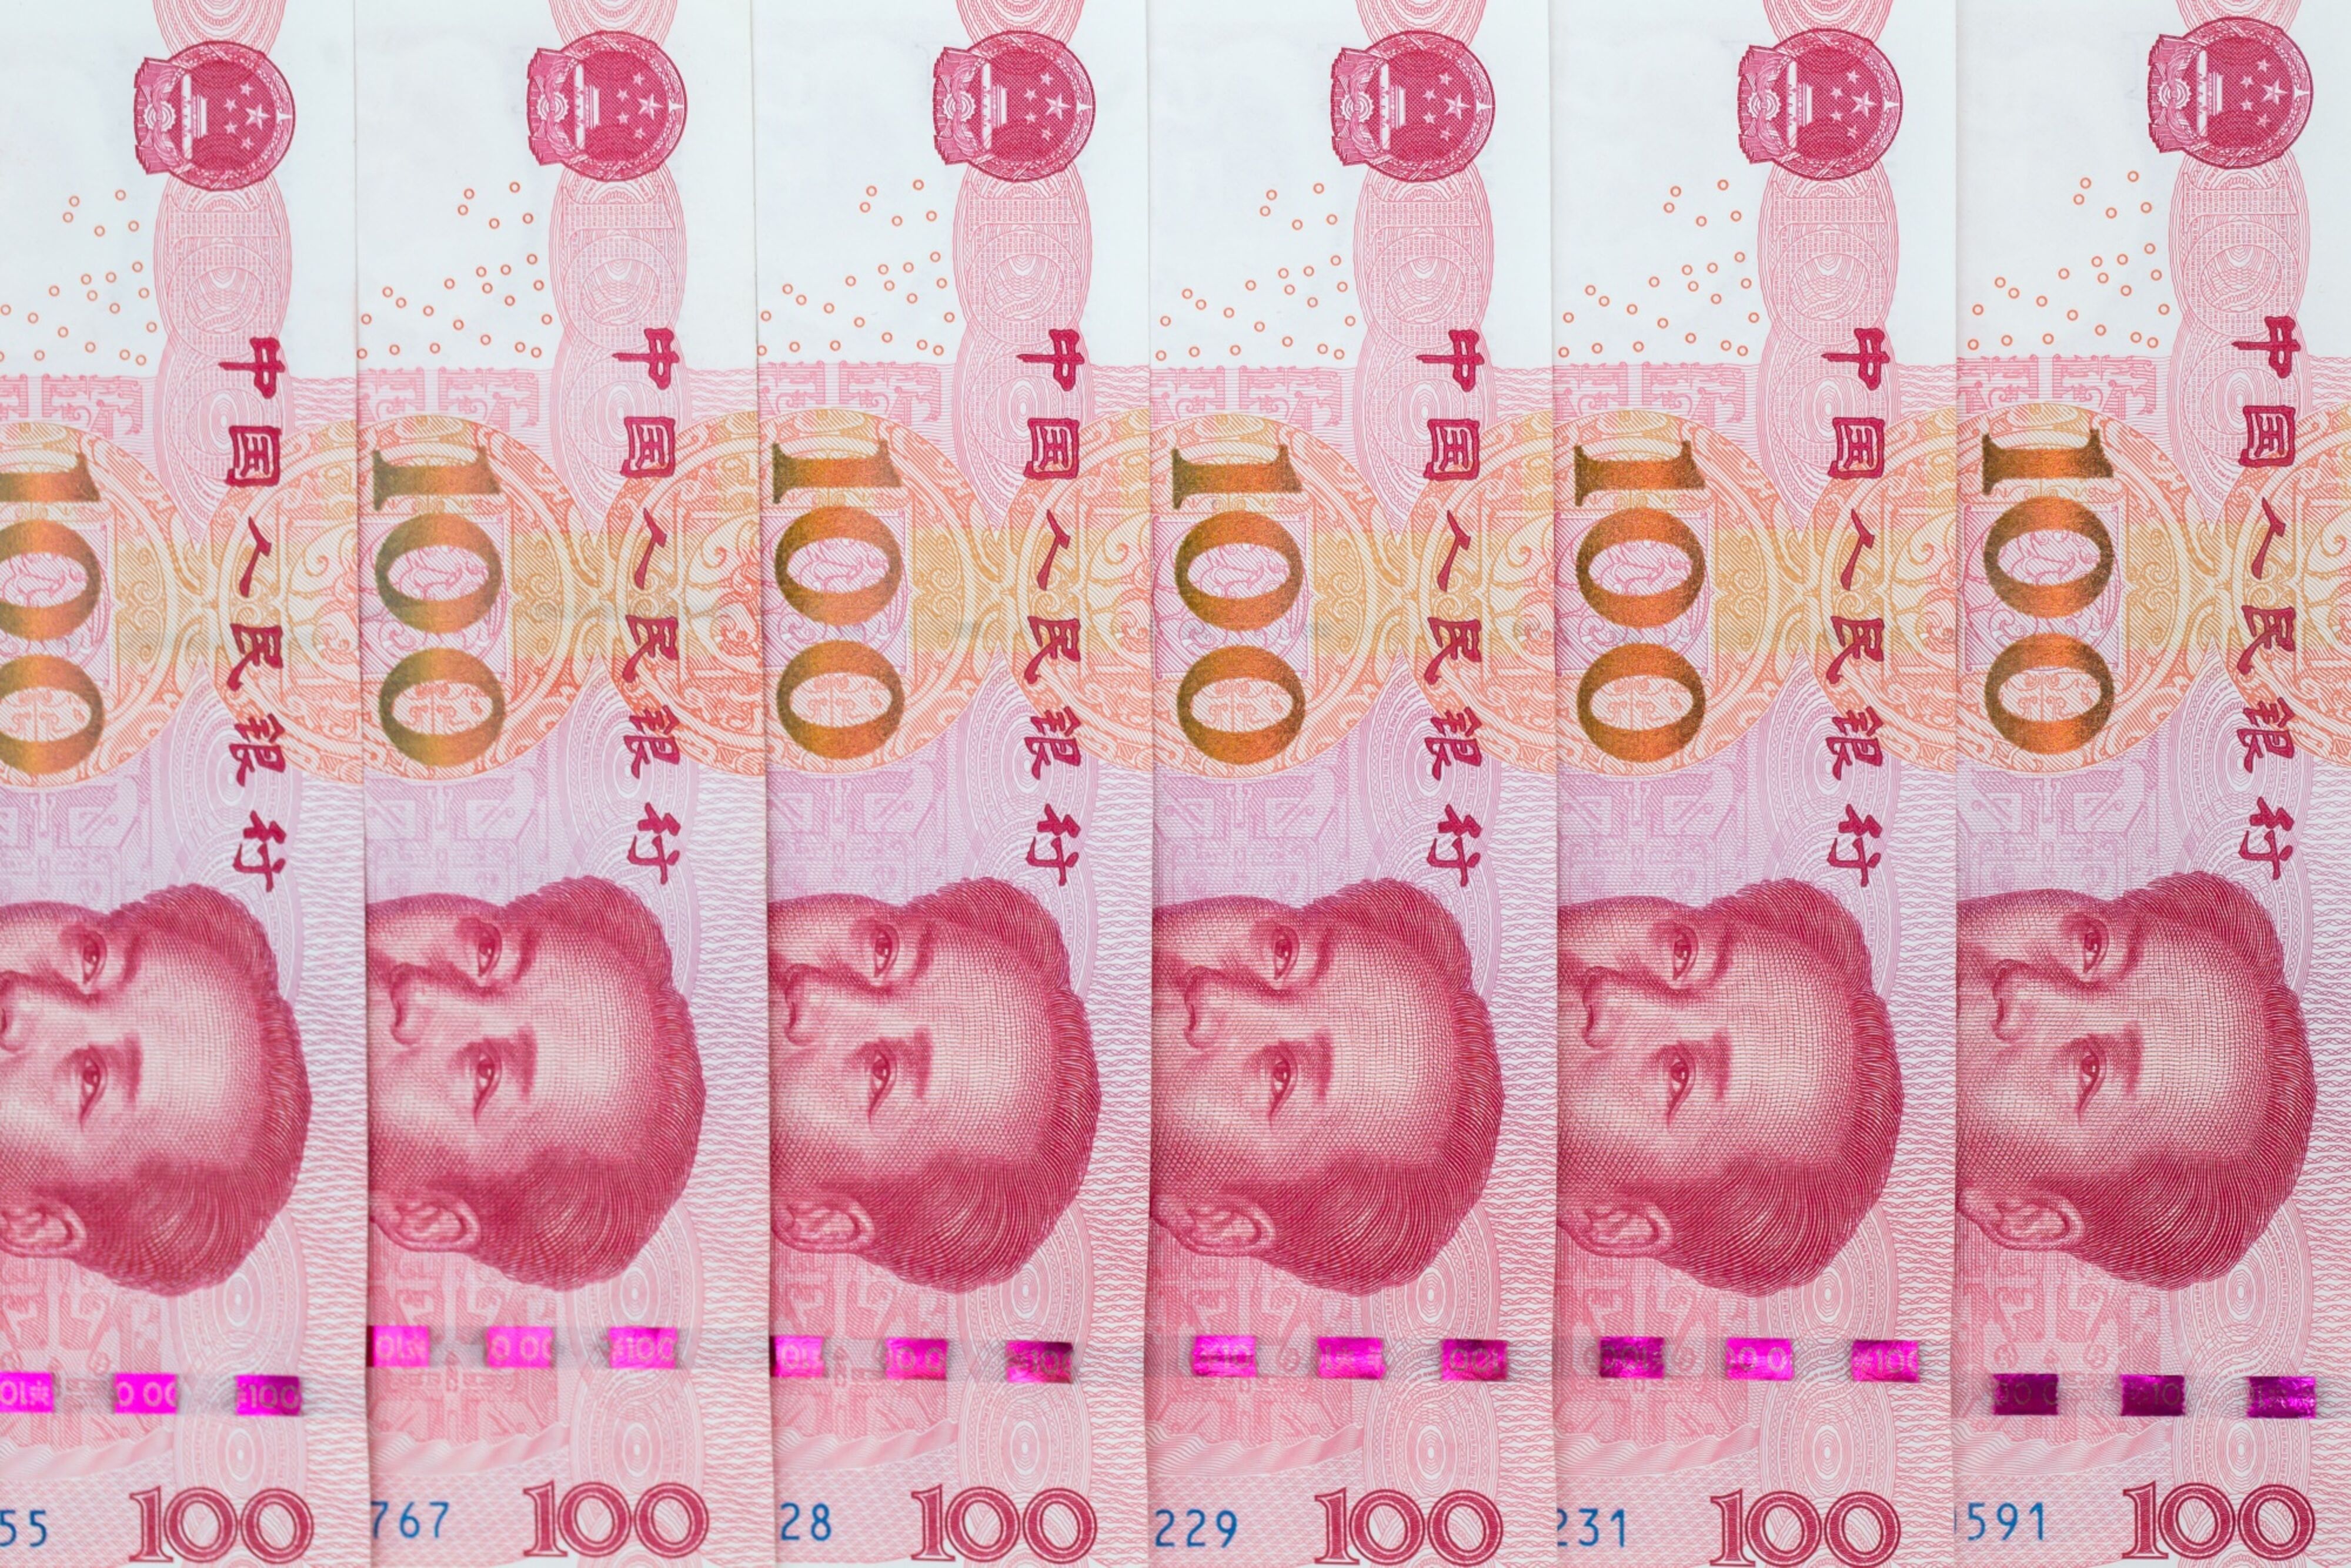 The catalyst for the yuan’s slide Friday was the PBOC’s decision to lower its daily reference rate for the managed currency by the most since early February. Photo: Bloomberg